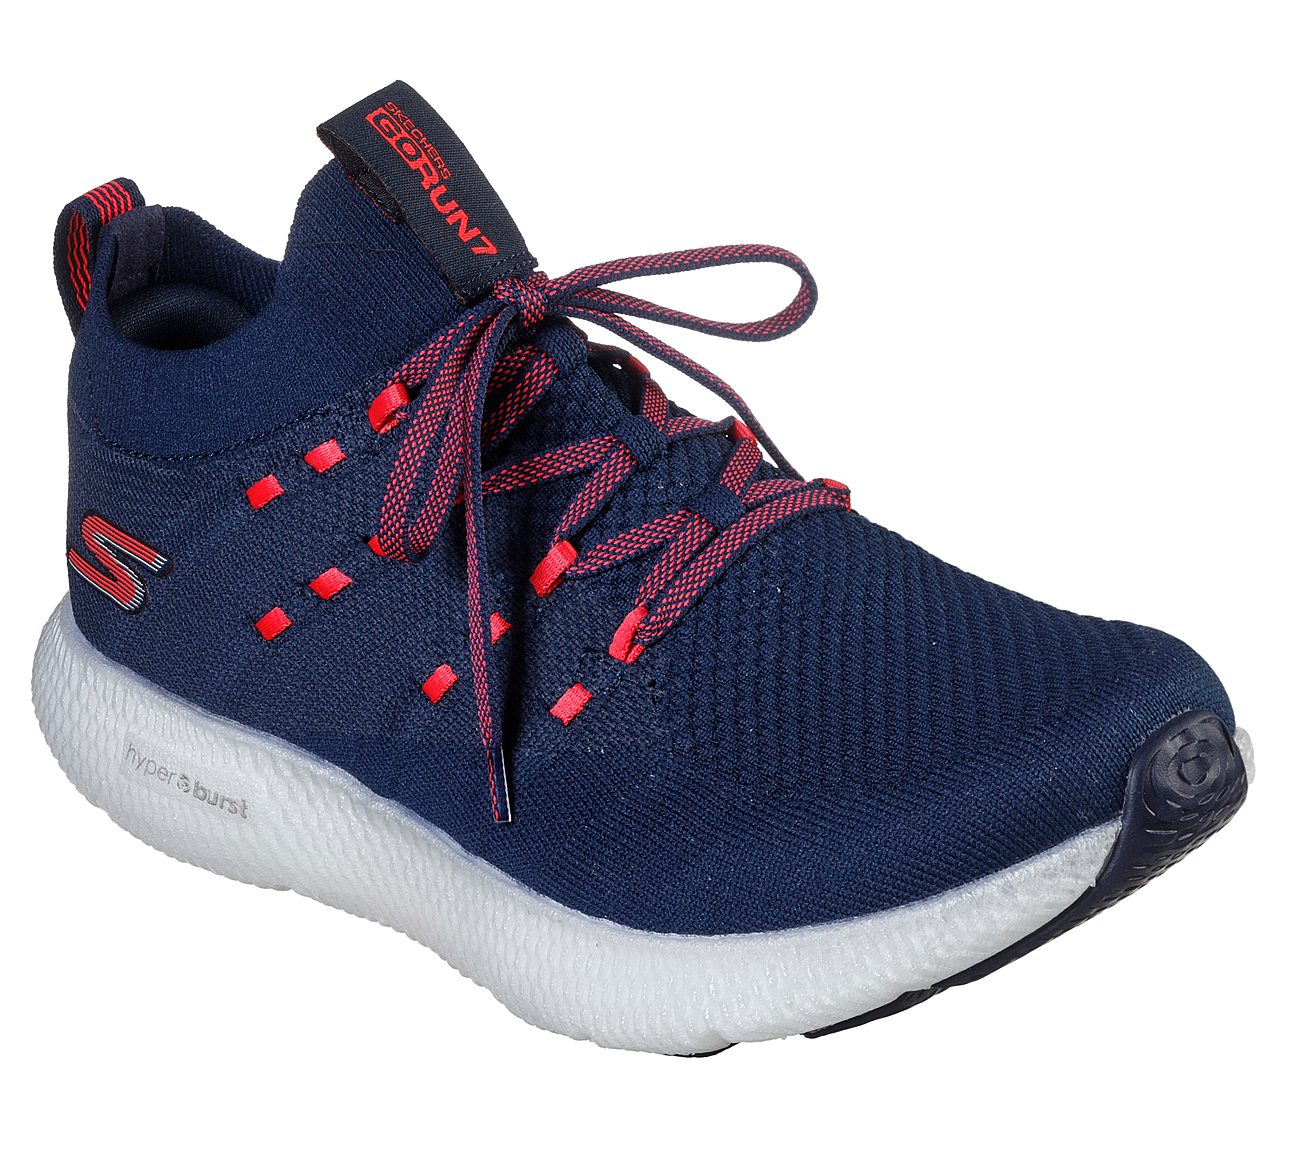 GO RUN 7 -, NAVY/PINK Footwear Lateral View